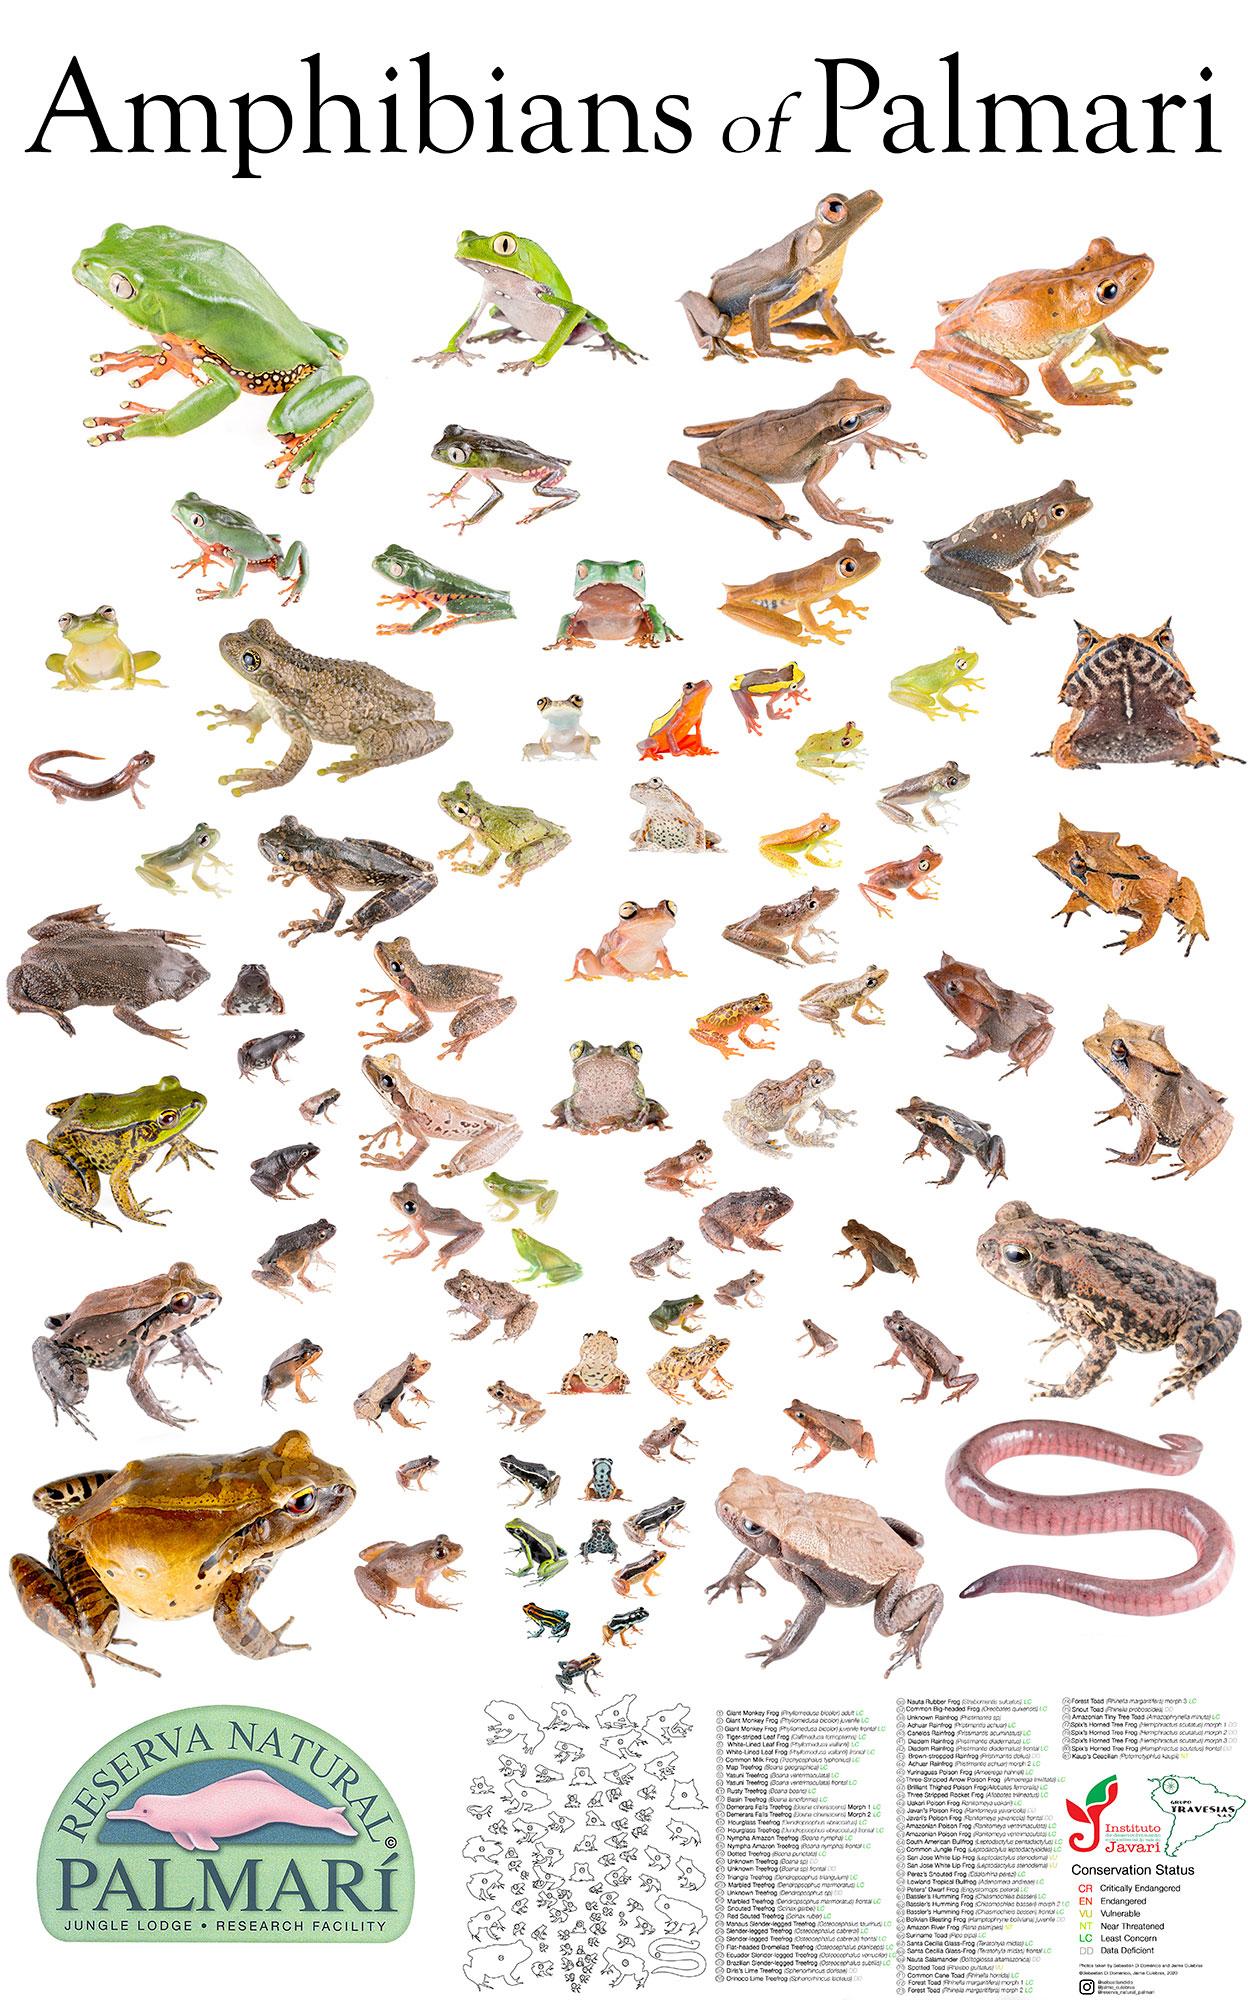 Reserva Natural Palmari Illustrations and species list of frogs